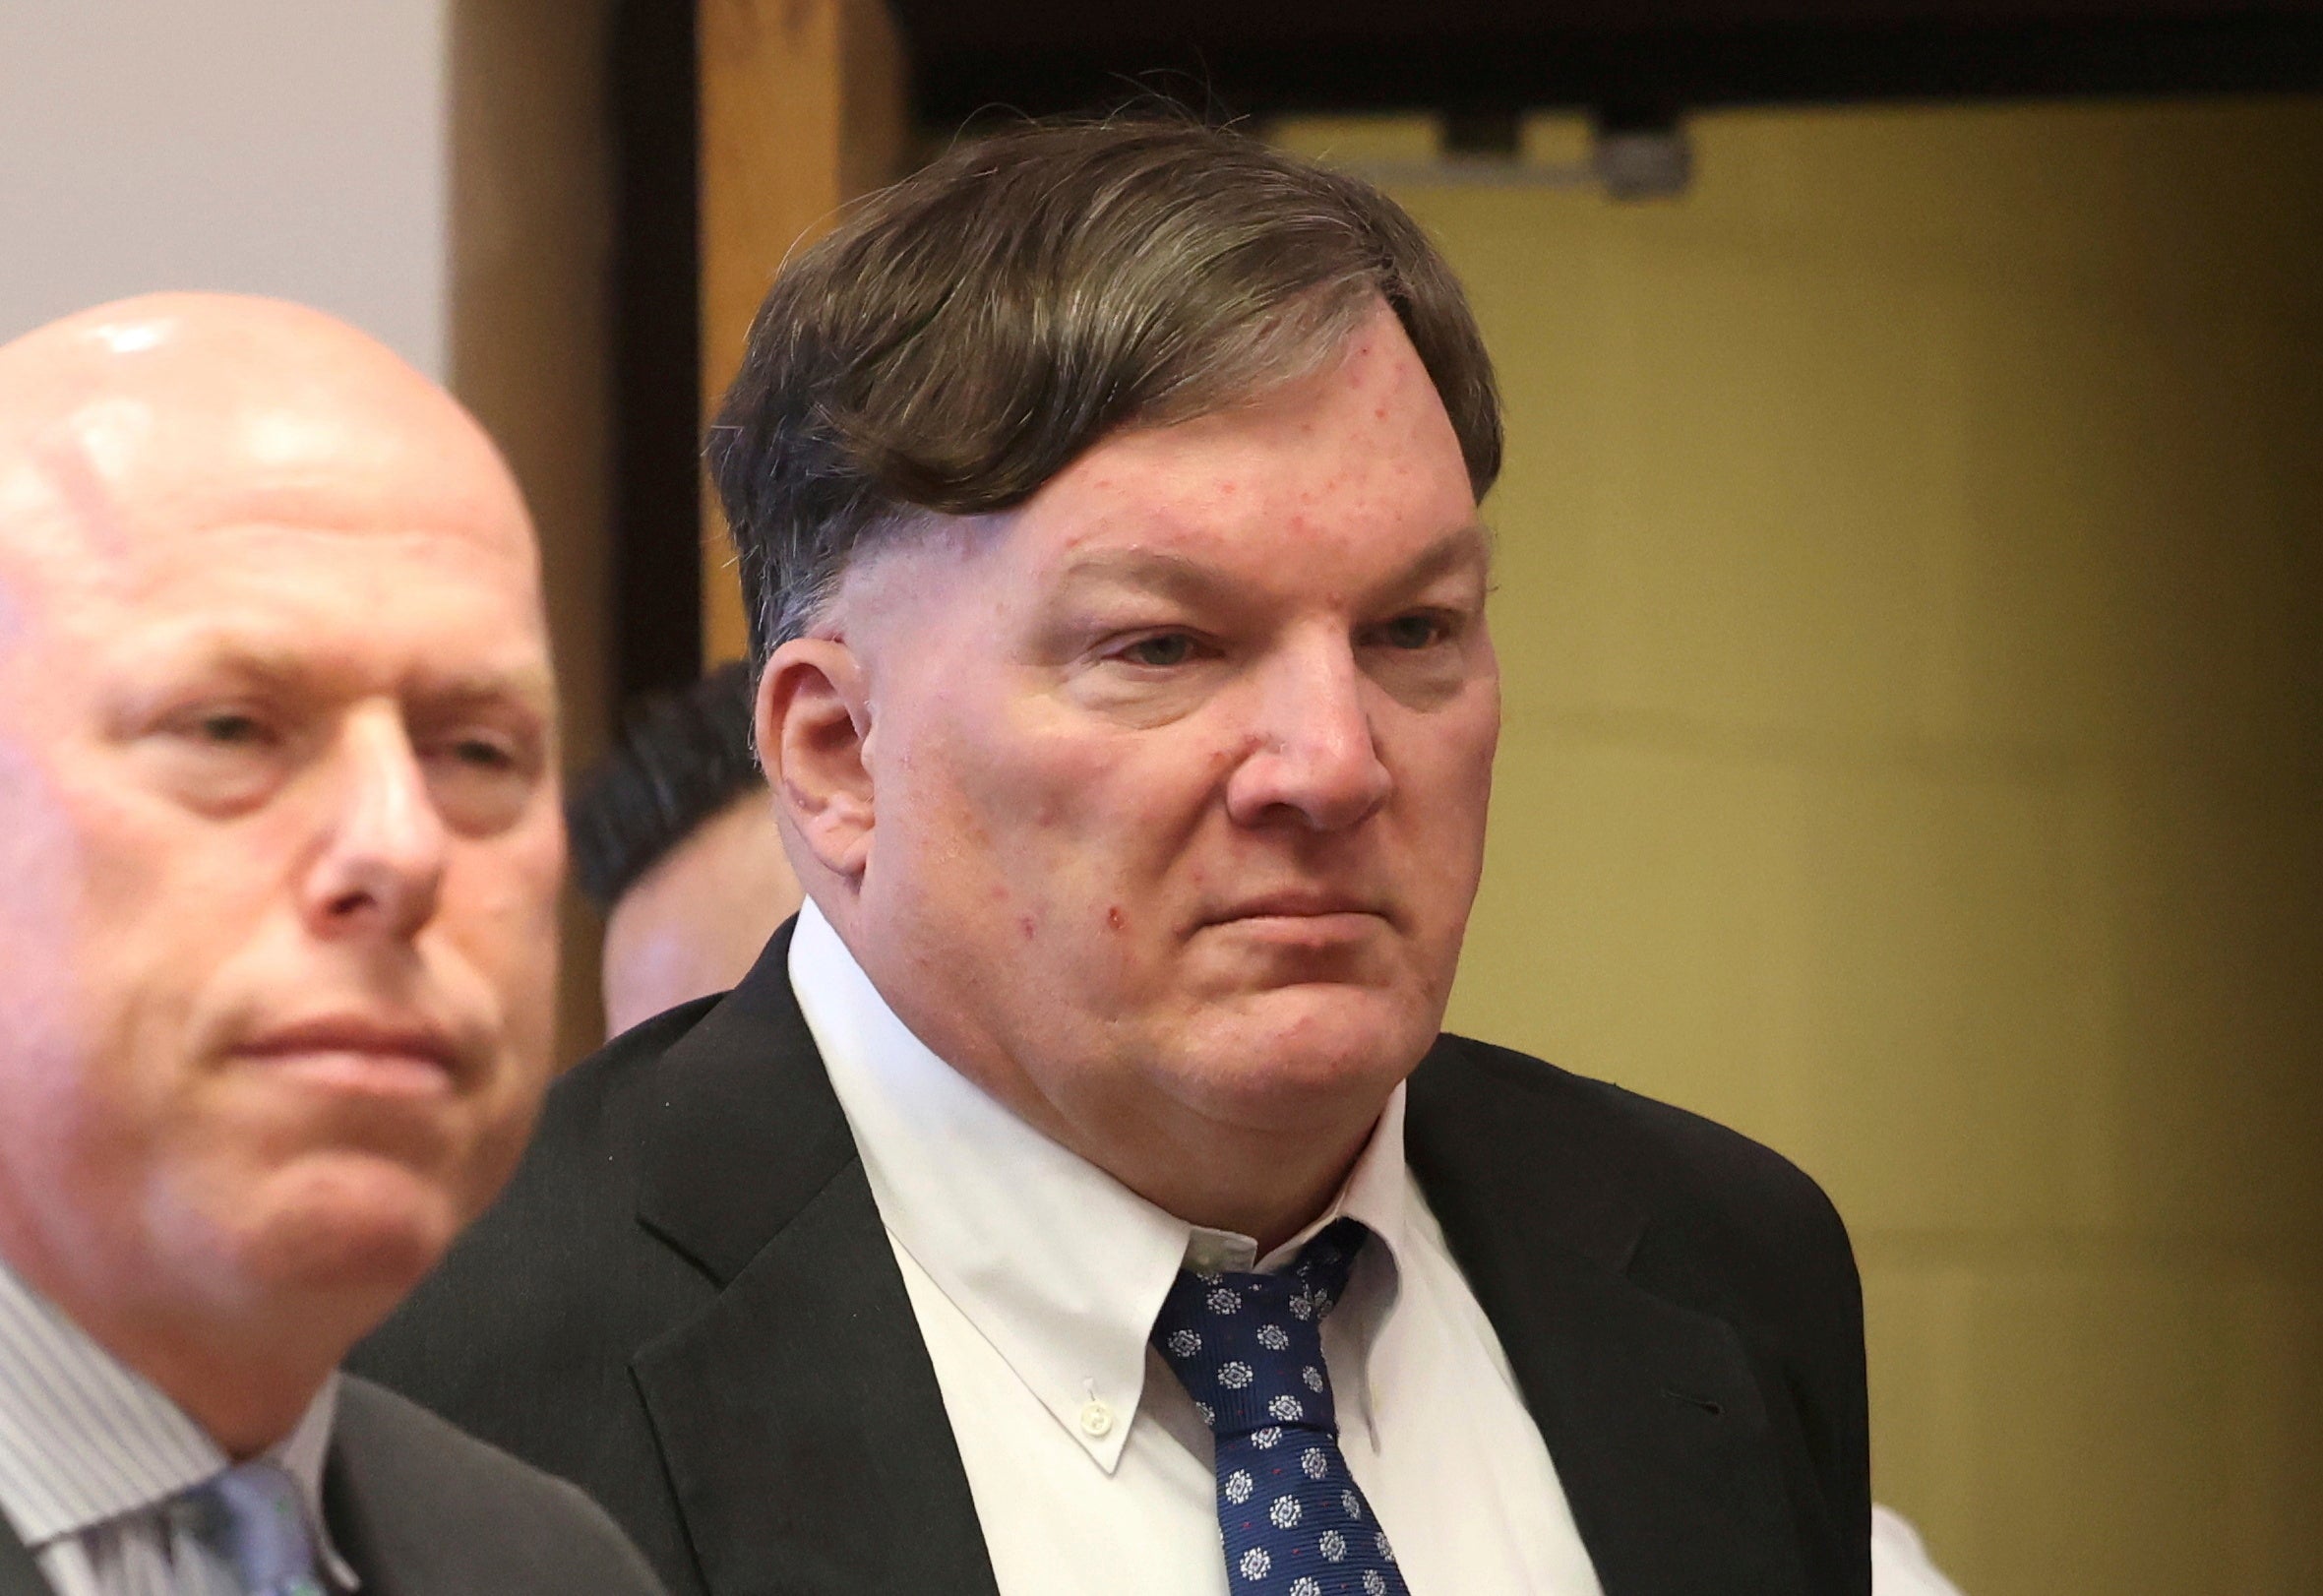 Alleged Gilgo serial killer Rex Heuermann, right, along with his attorney Michael Brown